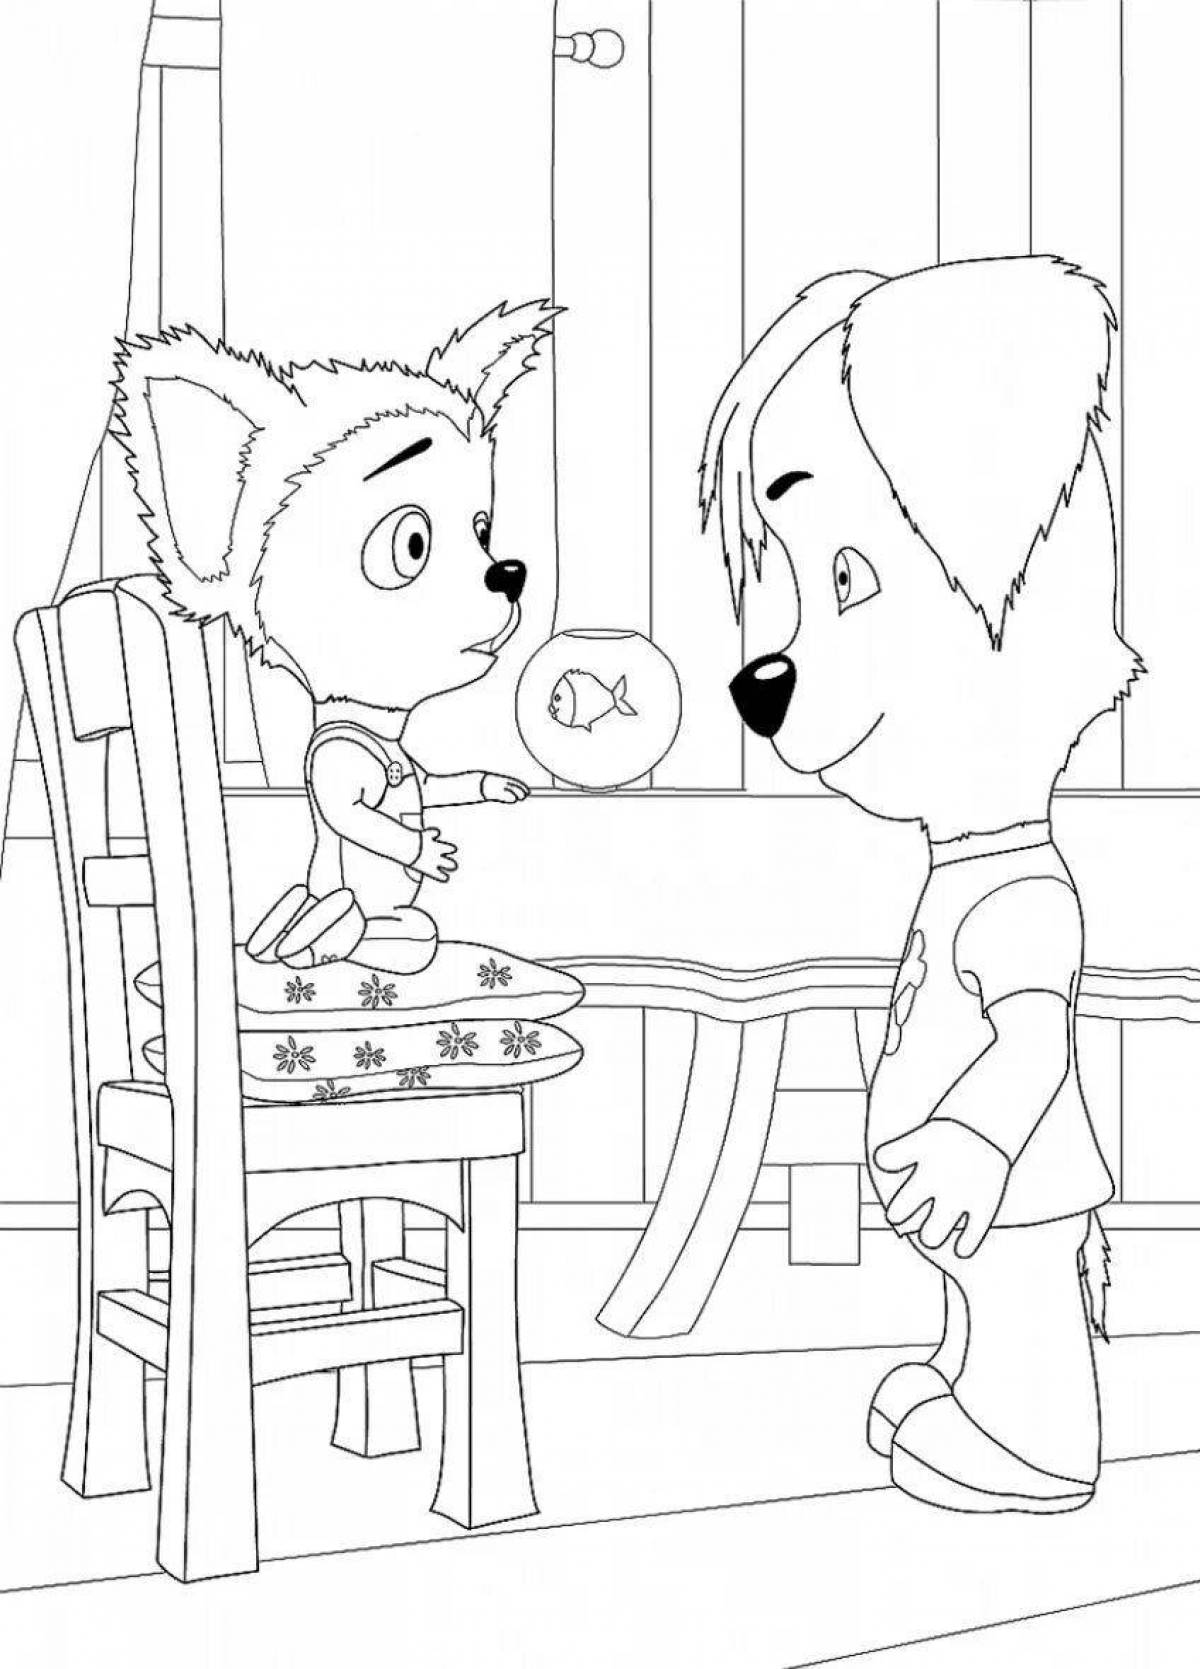 Coloring pages barboskins with wild flowers for children 5-6 years old